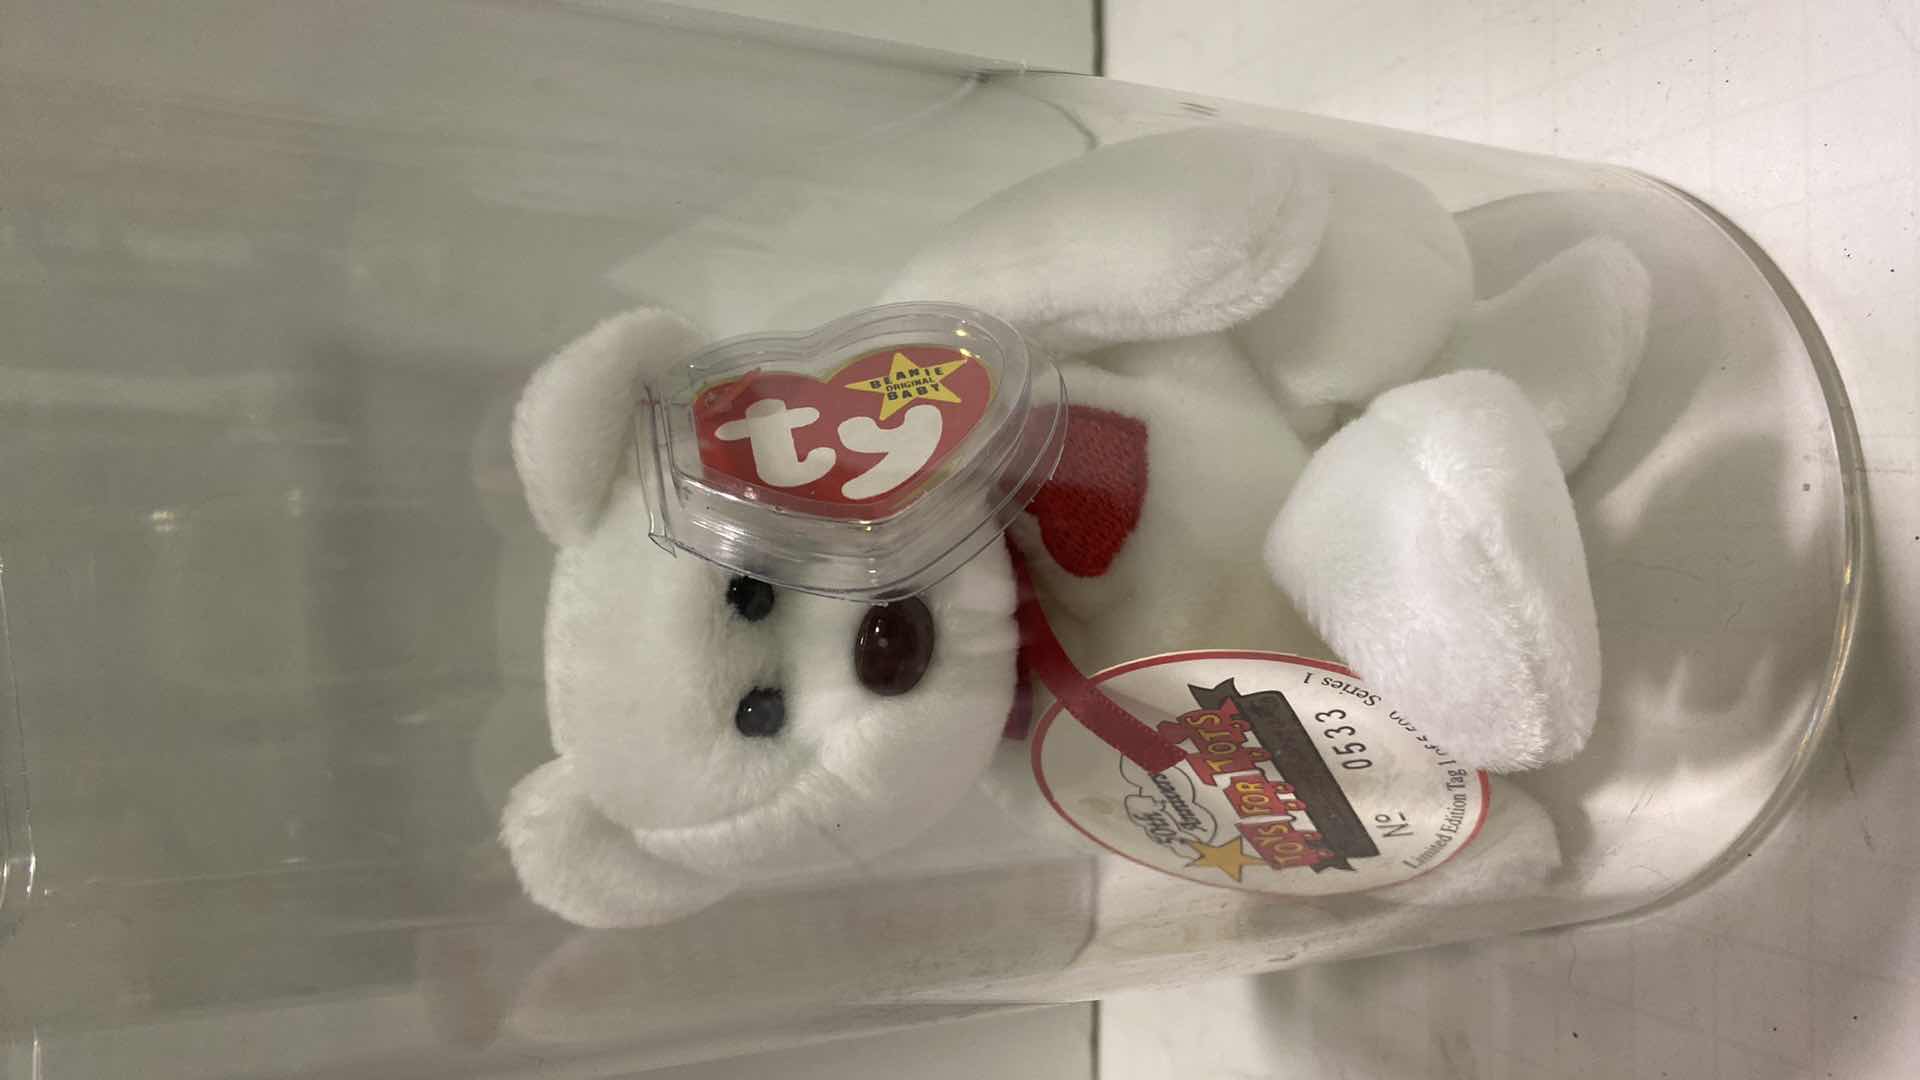 Photo 2 of RARE TOYS FOR TOTS 50th ANNIVERSARY TY VALENTINO BEAR #533/5,500 WITH COA, ORIGINAL COST $250